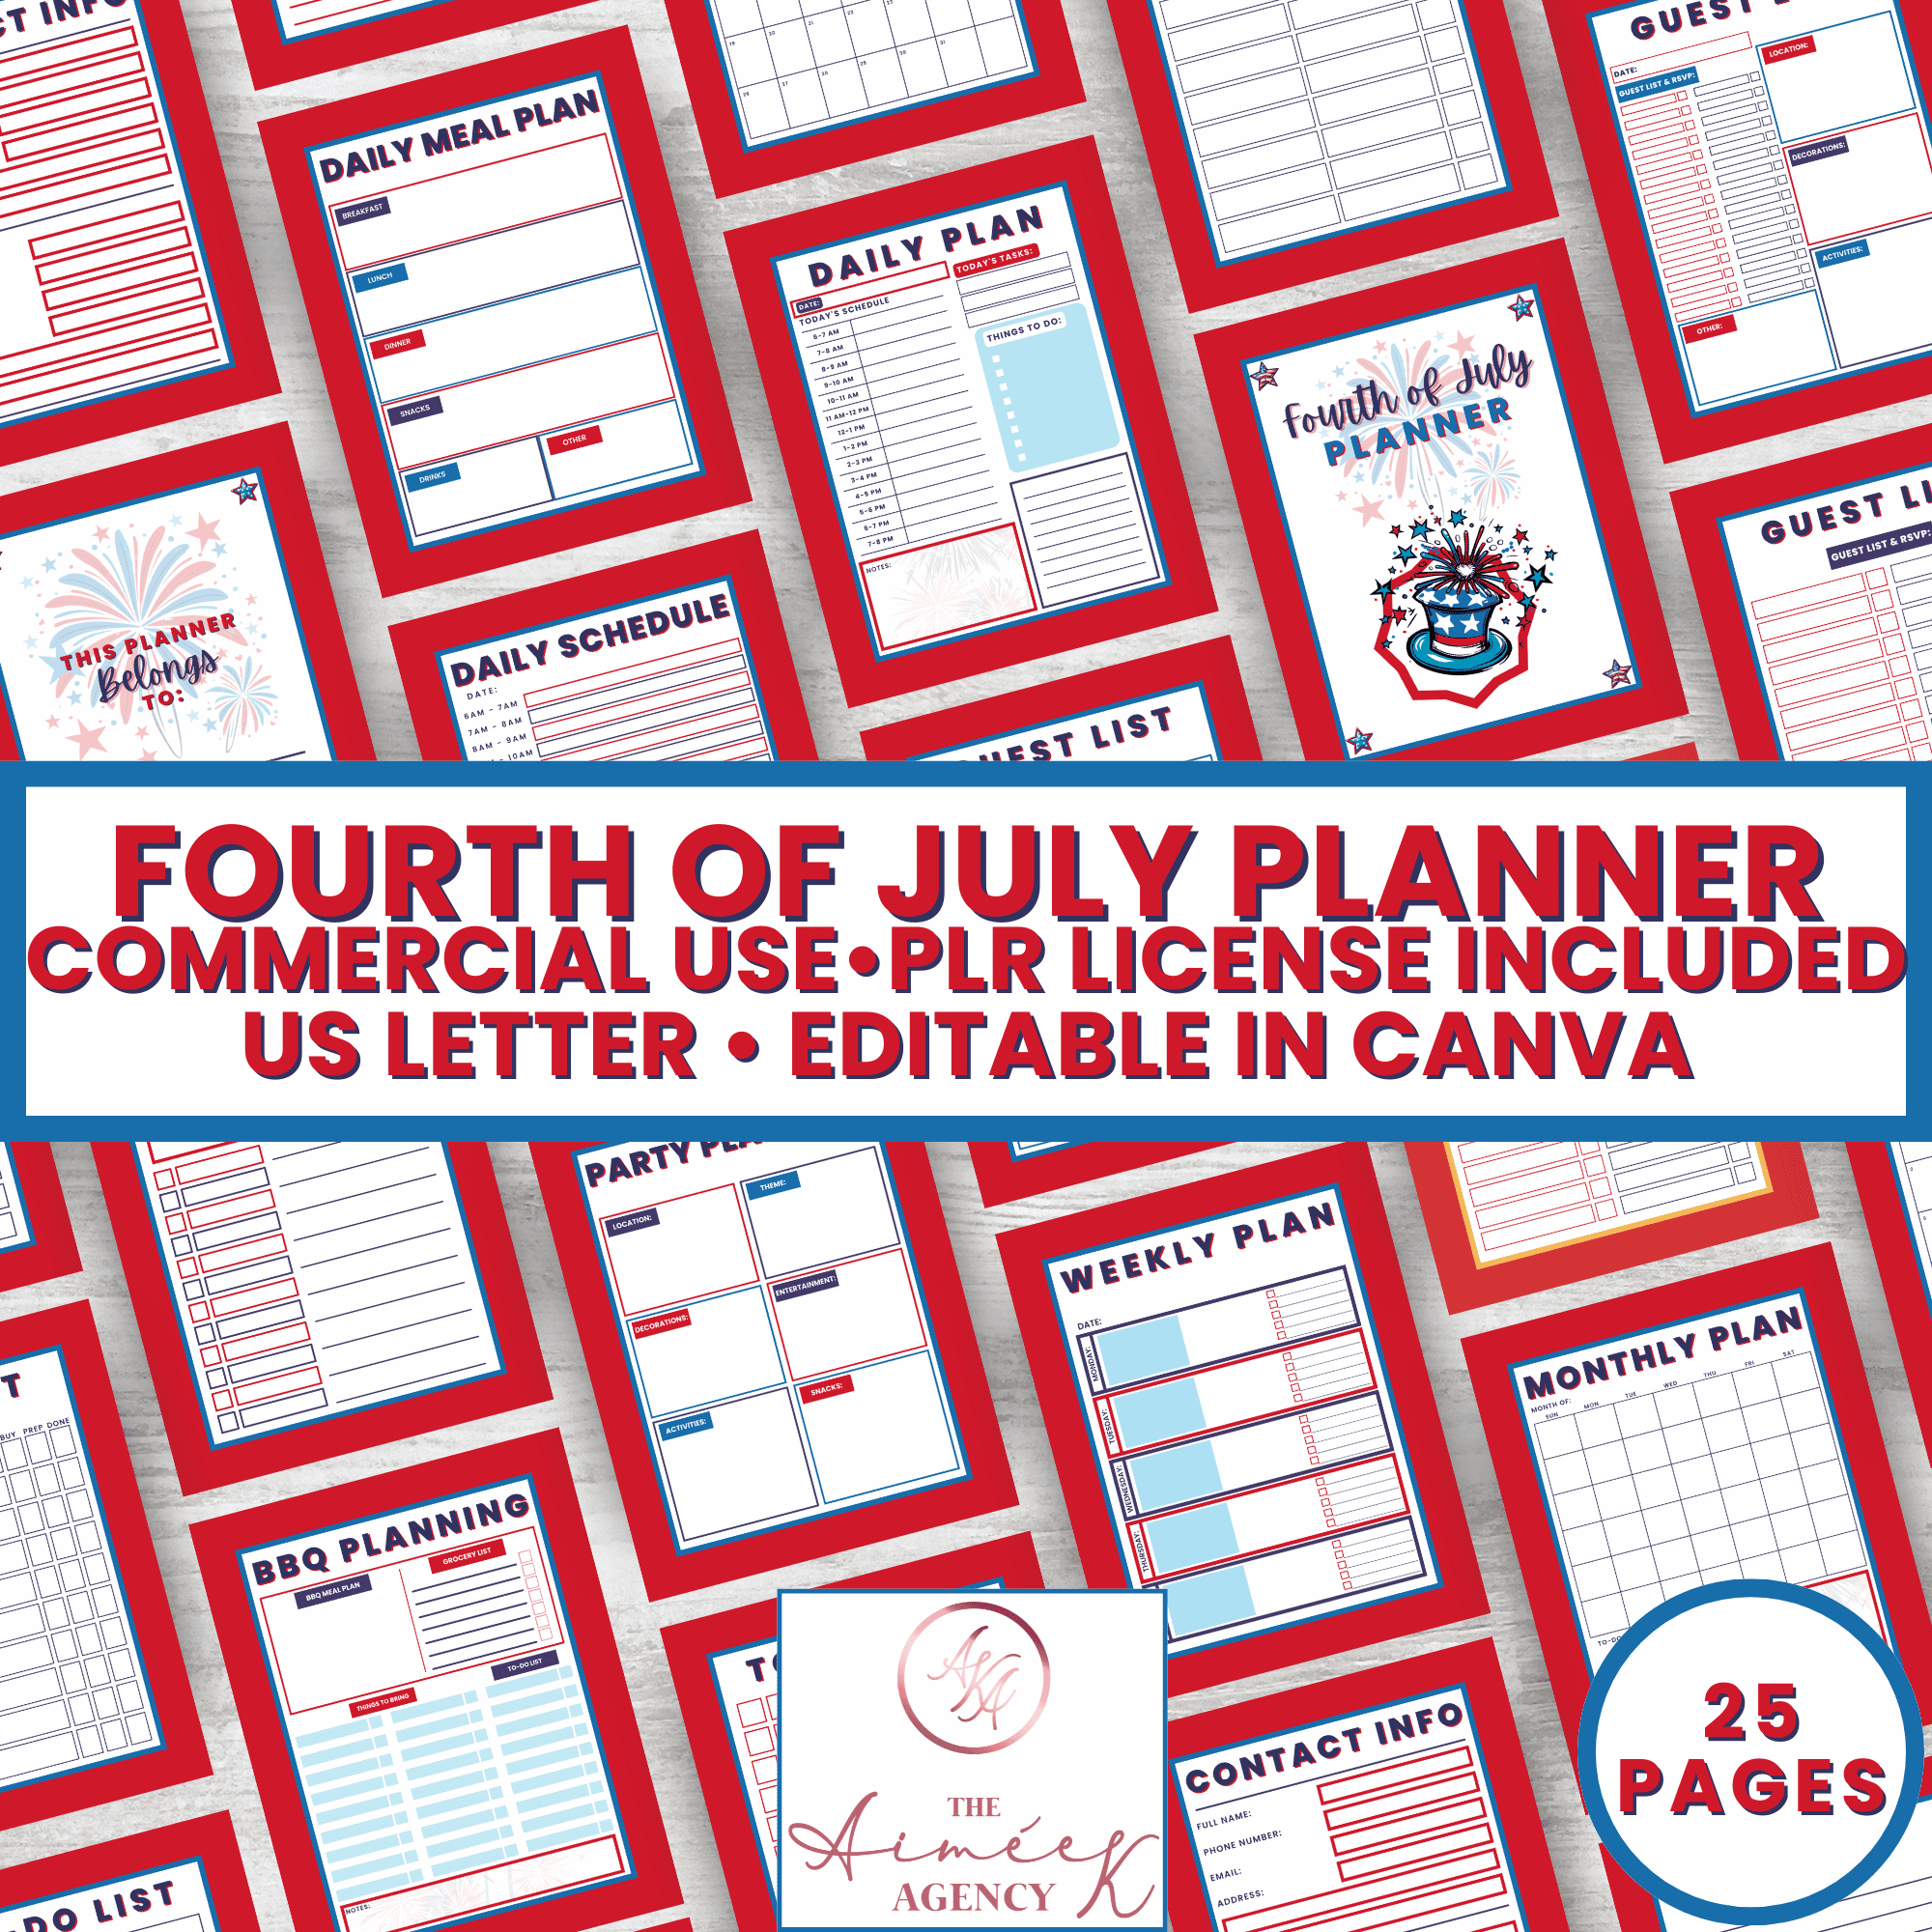 Image showing the cover and various inside pages of a Fourth of July themed planner with 25 pages. The planner is for commercial use, includes a PLR license, is US Letter sized, and editable in Canva.